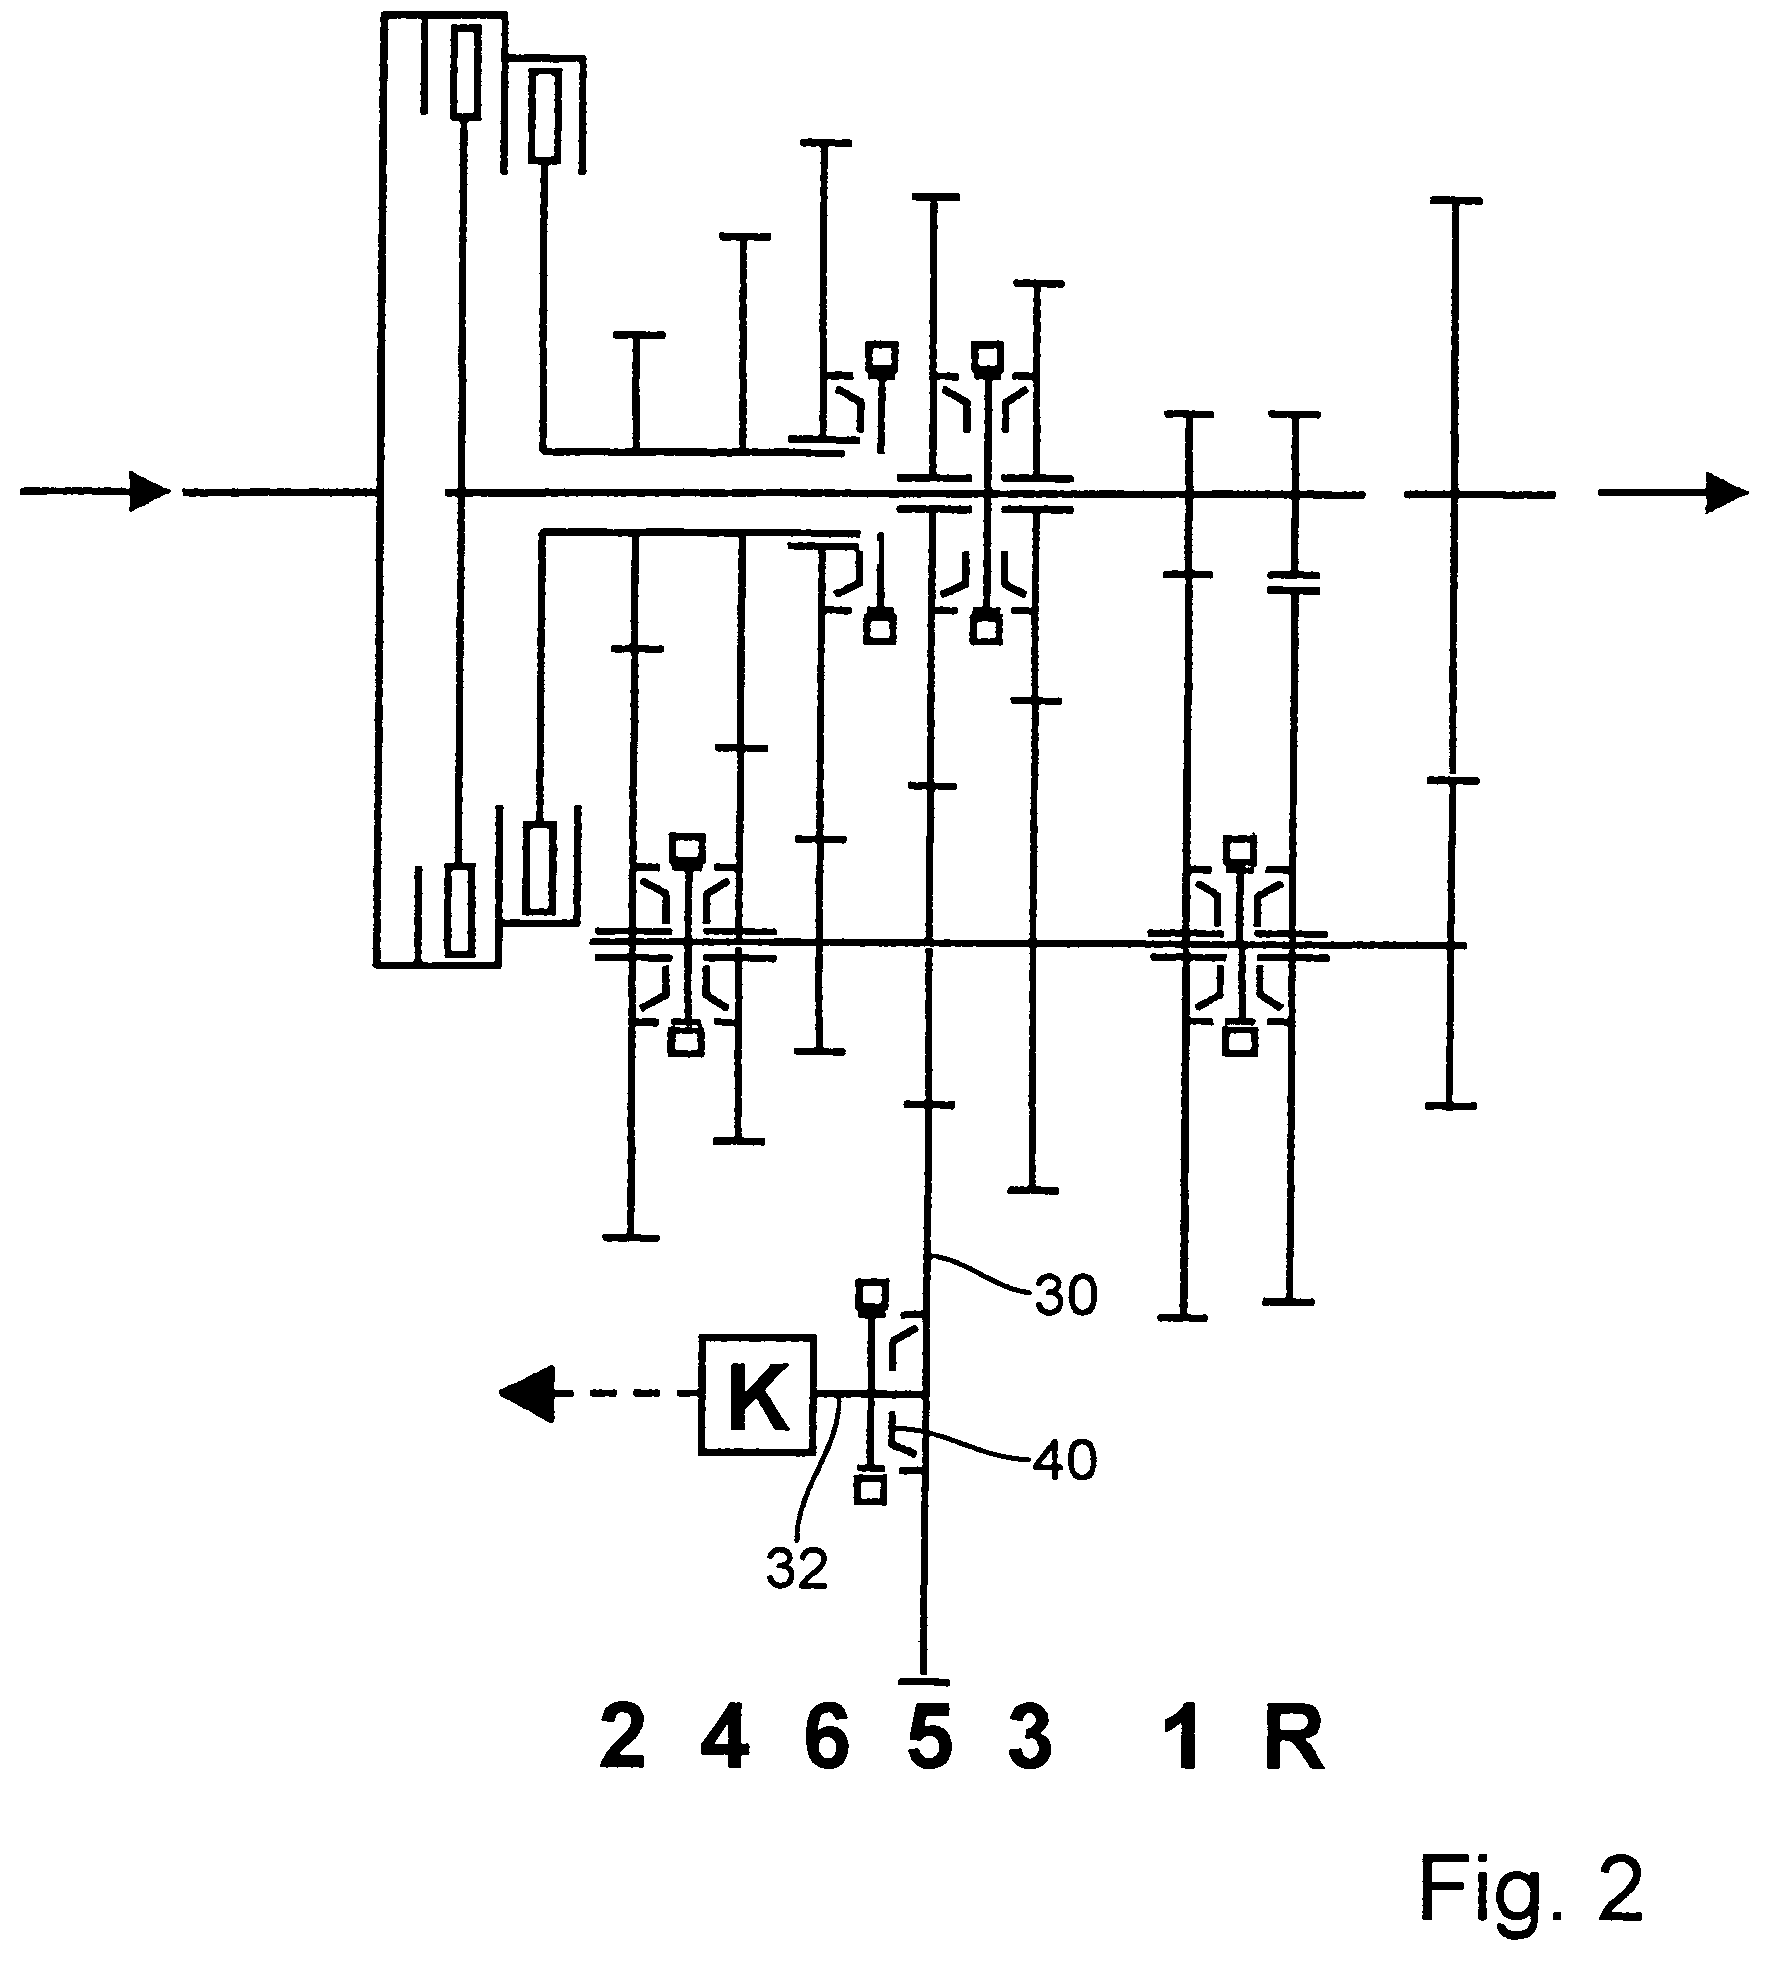 Parallel manual transmission for four-wheel drive and parallel manual transmission for transverse installation in a front-wheel drive vehicle